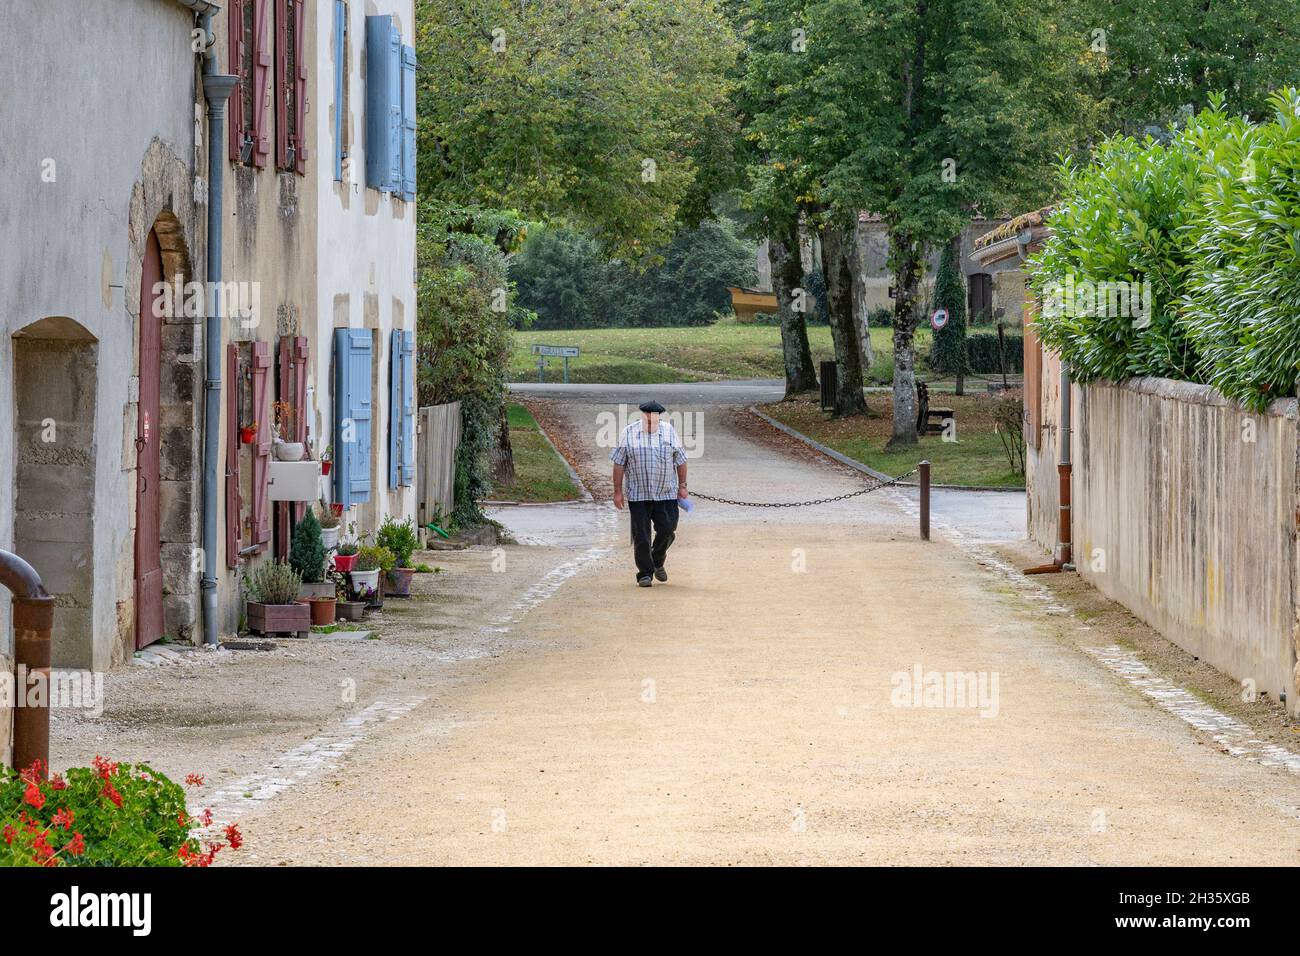 A priest walking down the street of the small village Labastide d'Armagnac, southern France Stock Photo